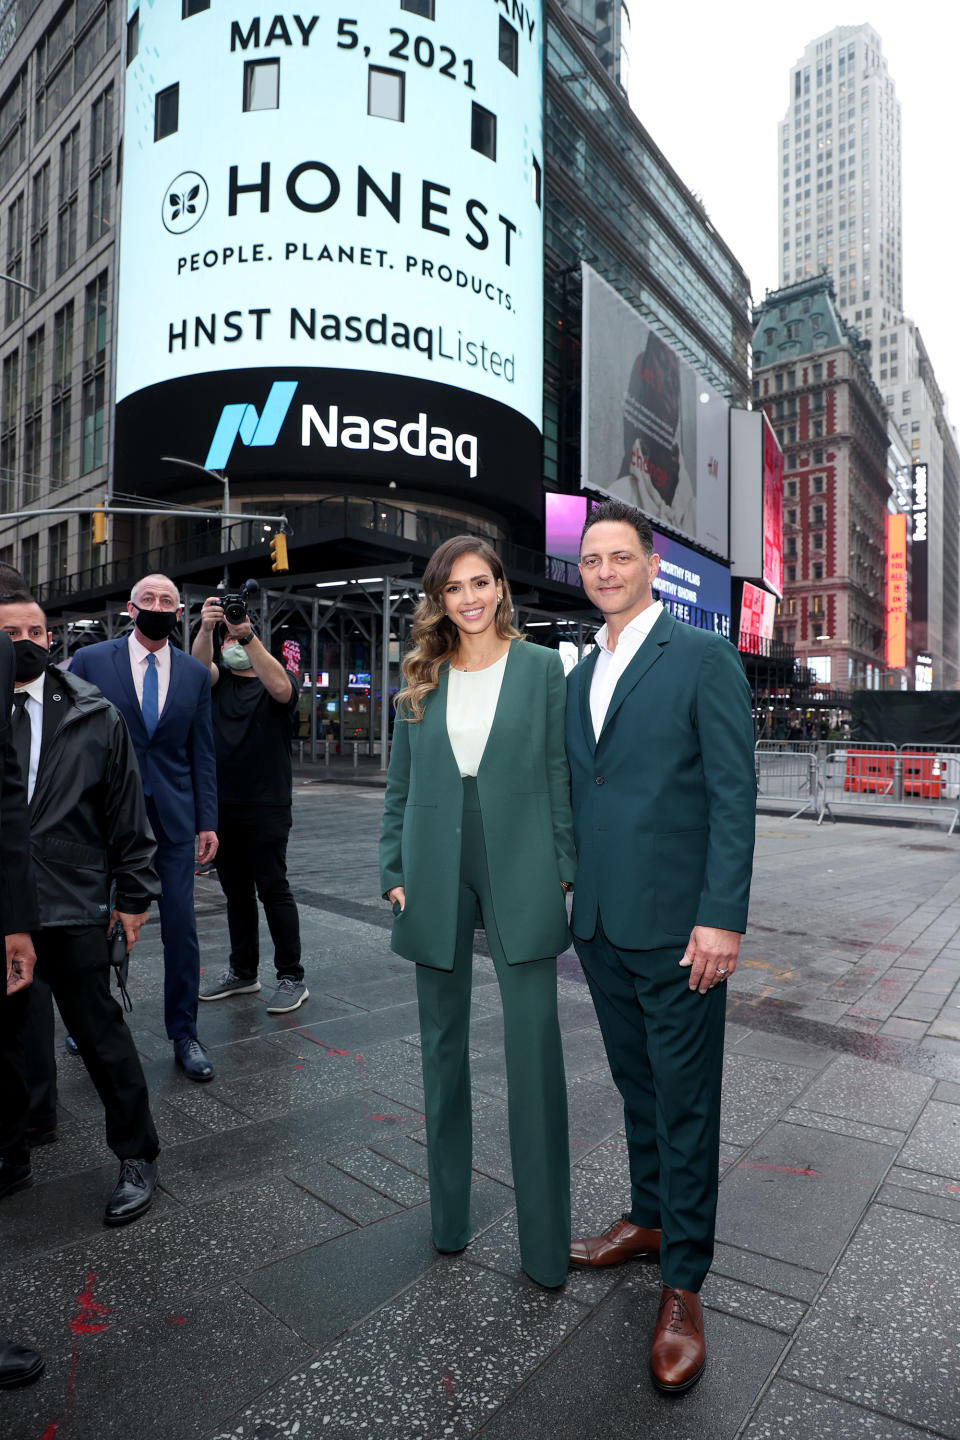 NEW YORK, NEW YORK - MAY 05: The Honest Company founder and chief creative officer Jessica Alba and The Honest Company CEO Nick Vlahos pose outside of Nasdaq as The Honest Company rings the Nasdaq Stock Market opening bell to mark the company&#39;s IPO at NASDAQ MarketSite on May 05, 2021 in New York City. (Photo by Dimitrios Kambouris/Getty Images for The Honest Company )